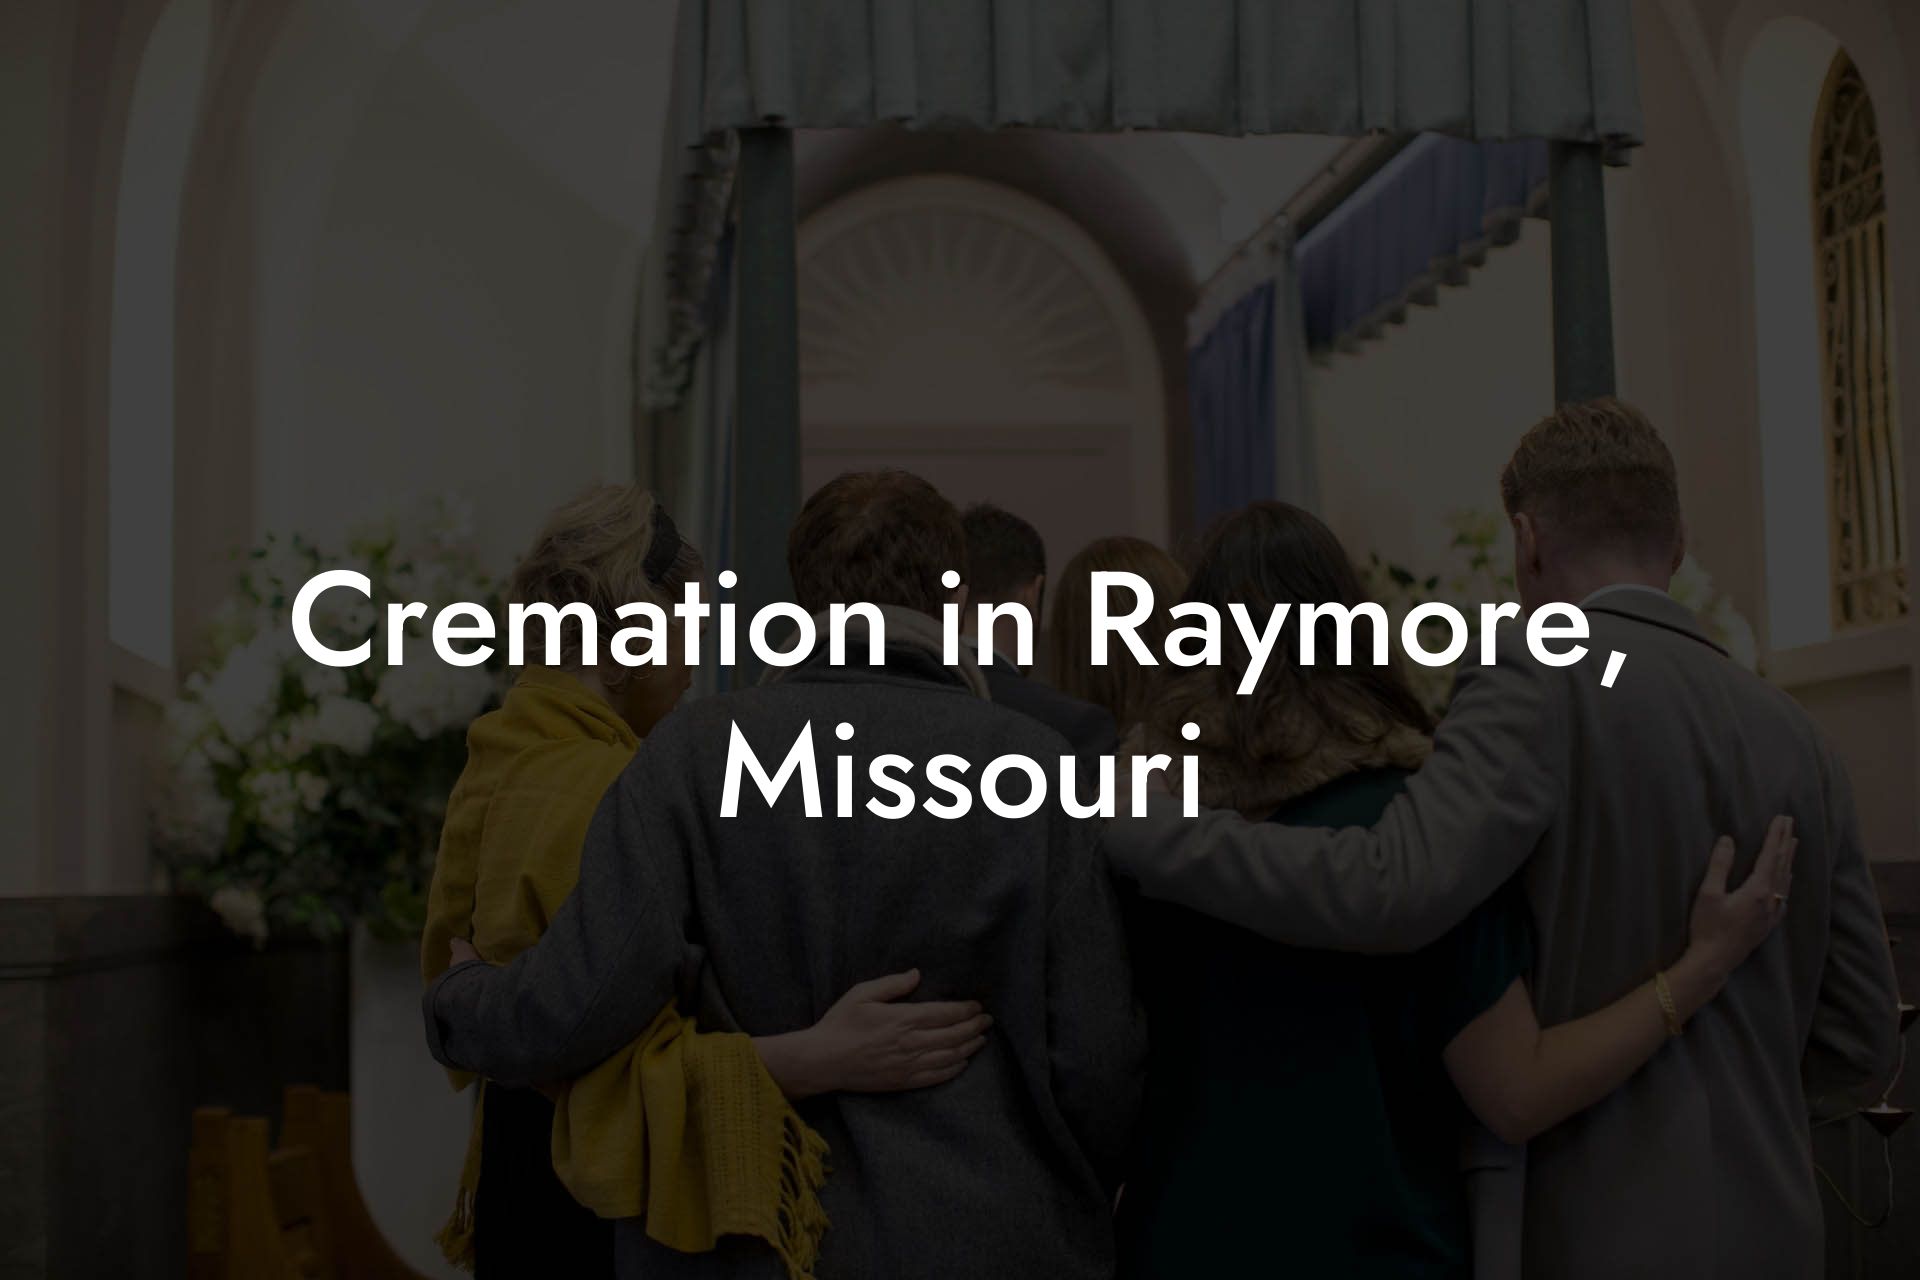 Cremation in Raymore, Missouri